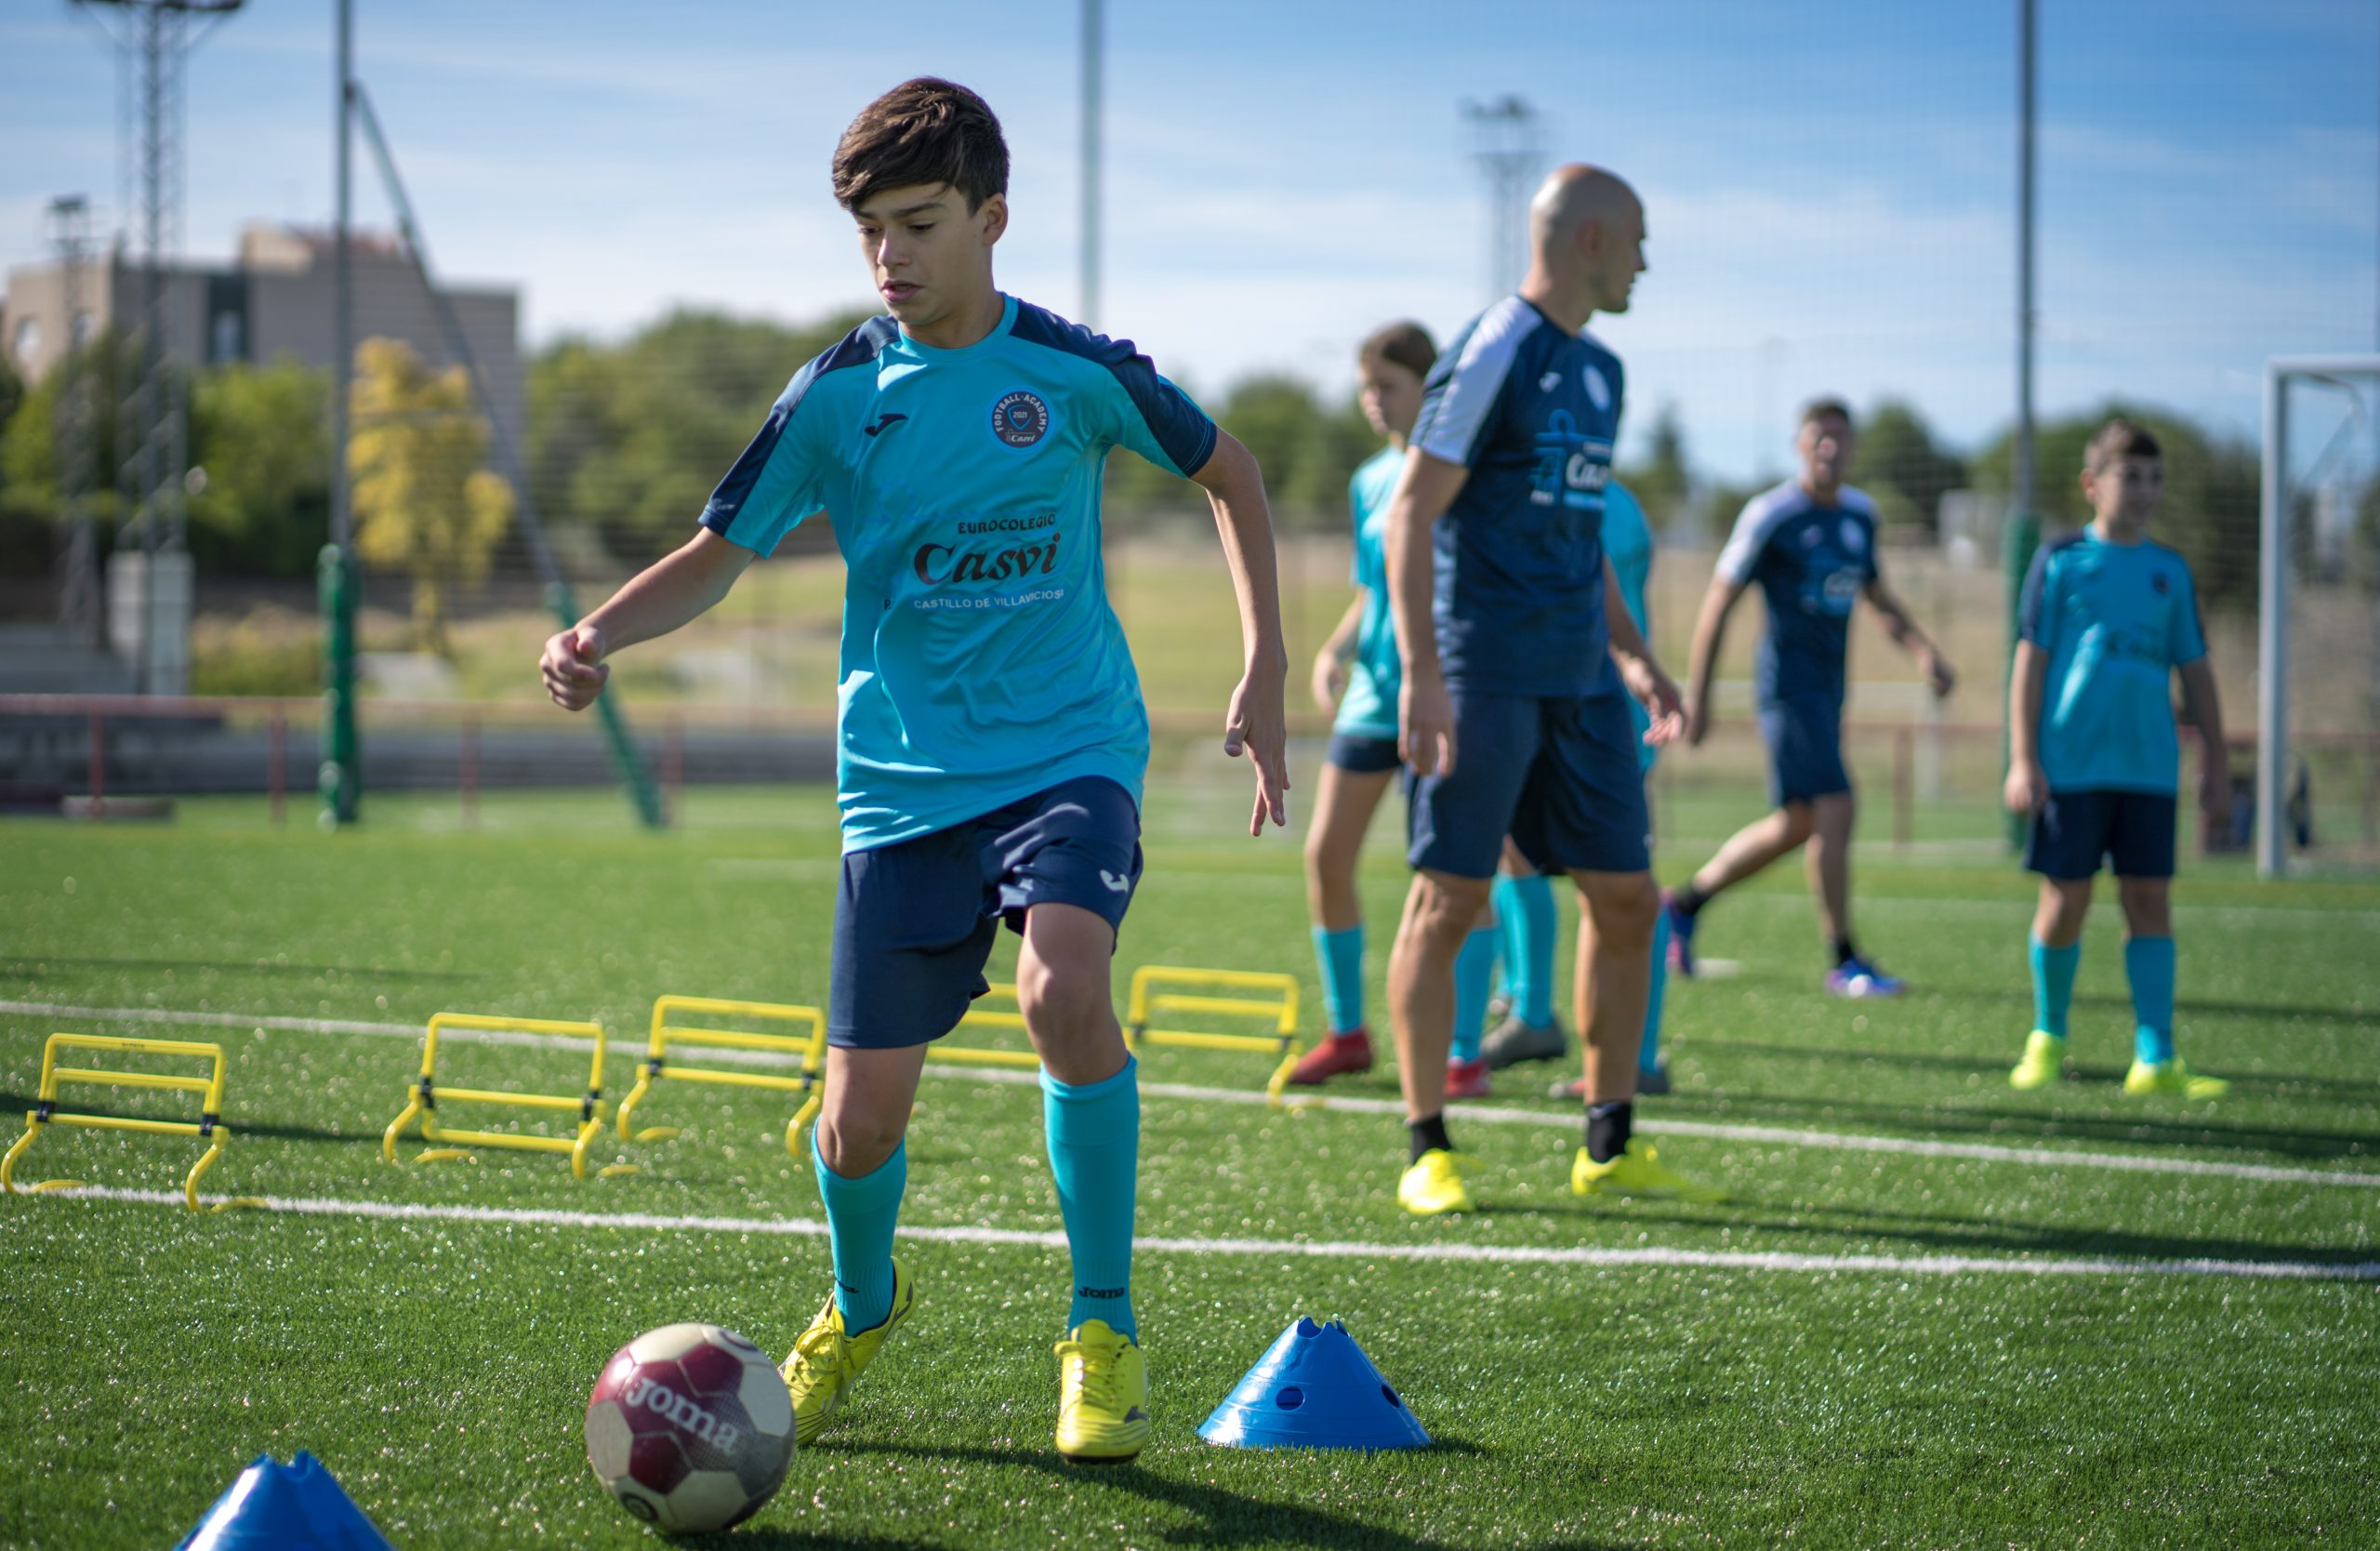 Casvi Football Academy - Technical figure, control and short passing at Casvi Football Academy